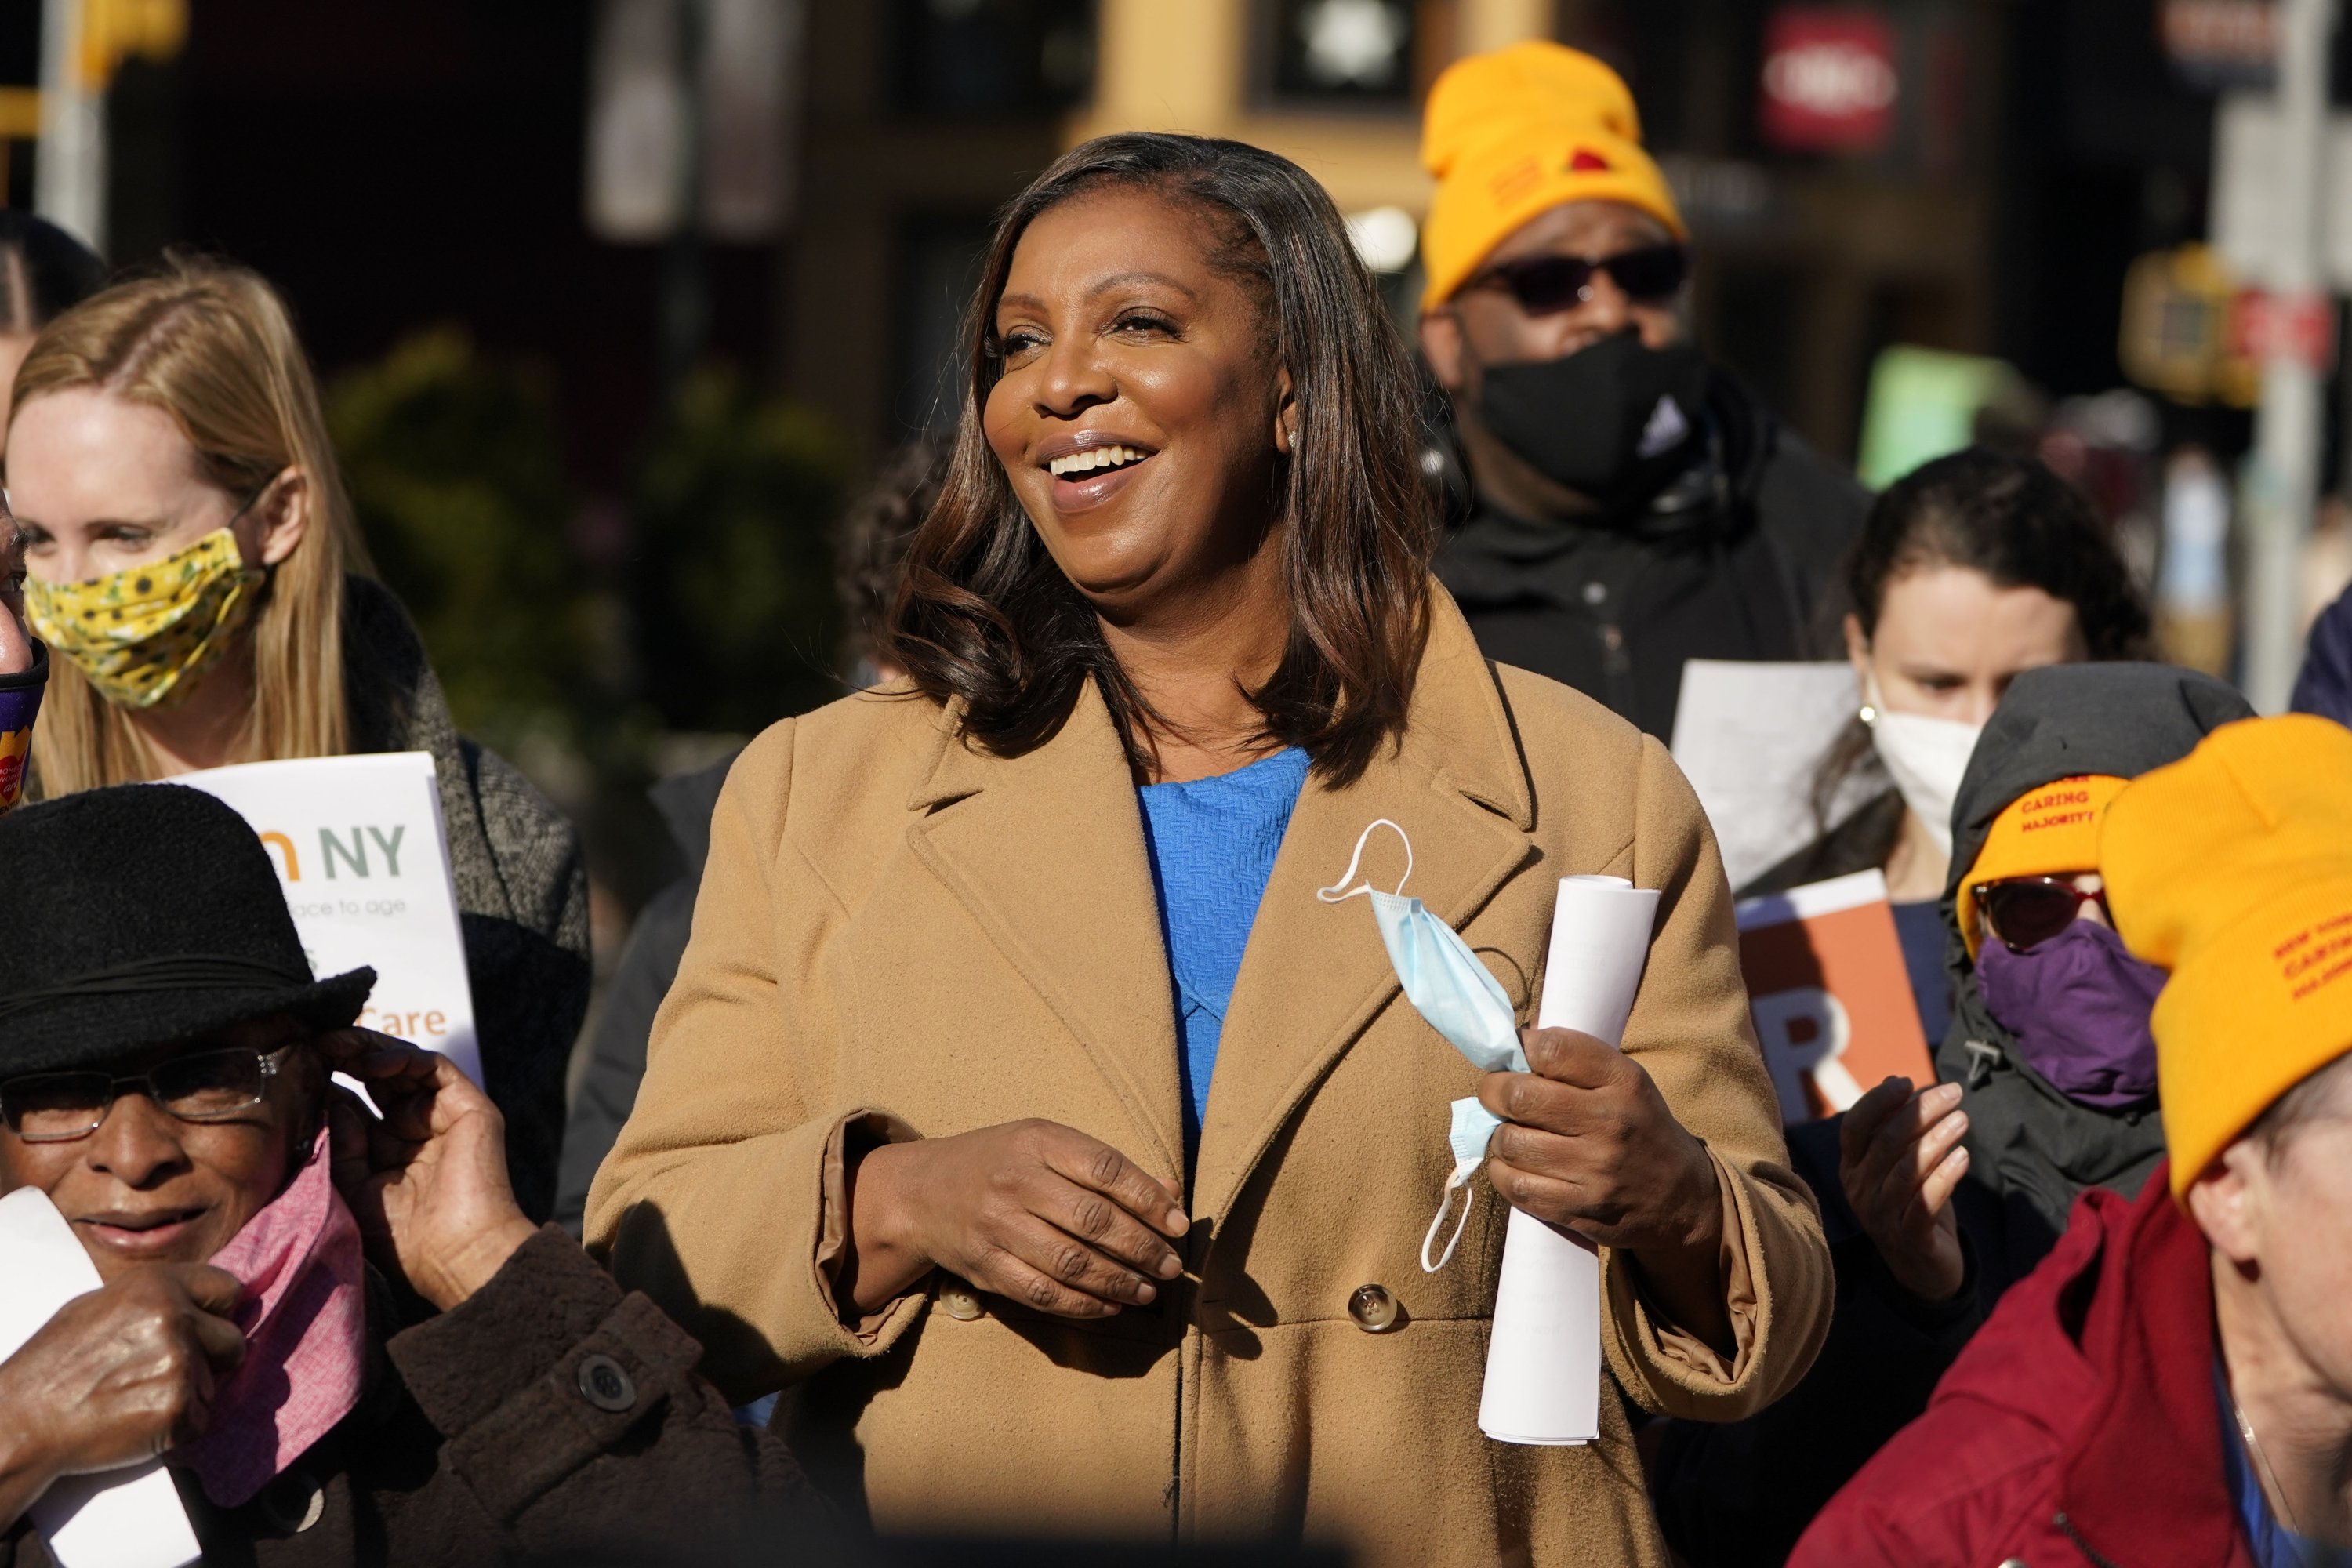 New York Attorney General Letitia James attends a rally in support of living wages for home care workers in New York, U.S., Dec. 14, 2021. (AP File Photo)